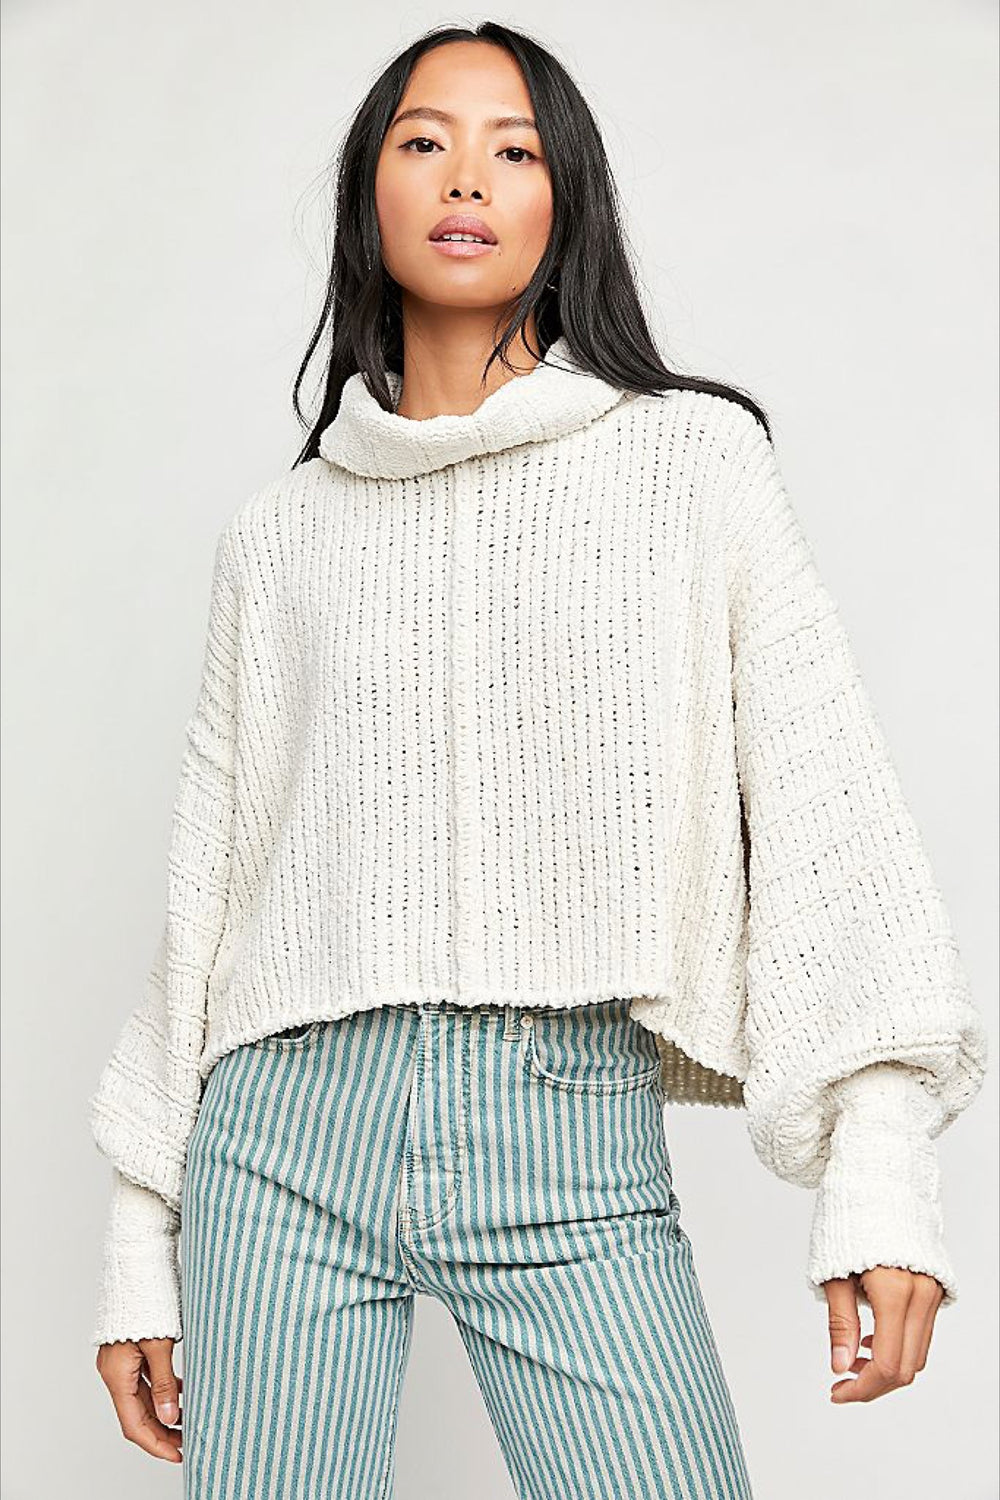 Vanilla Bean Be Yours Pullover